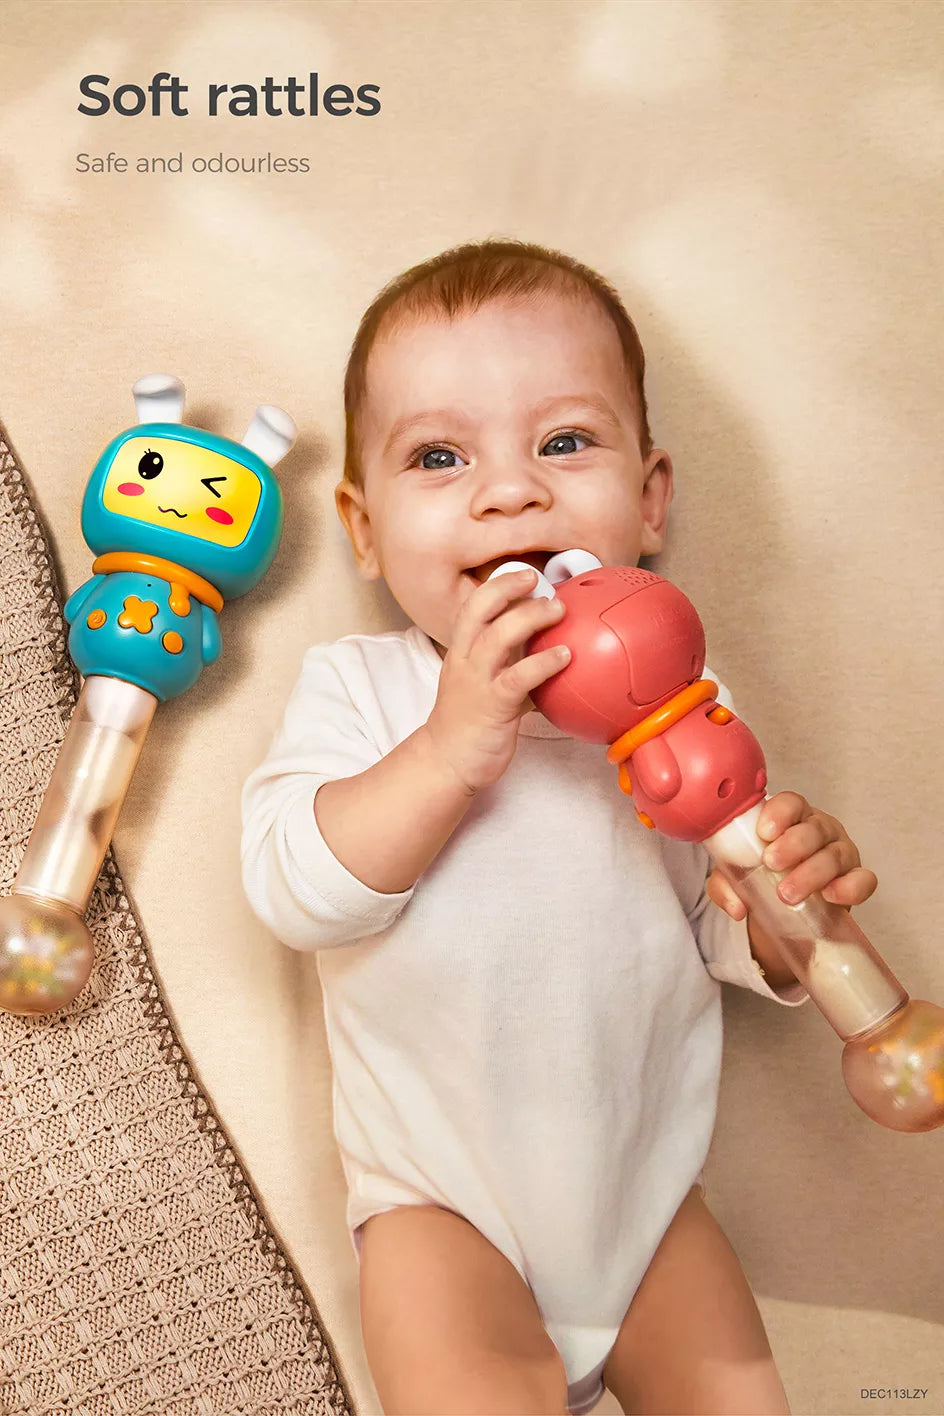 Shaker rattle for early music exploration